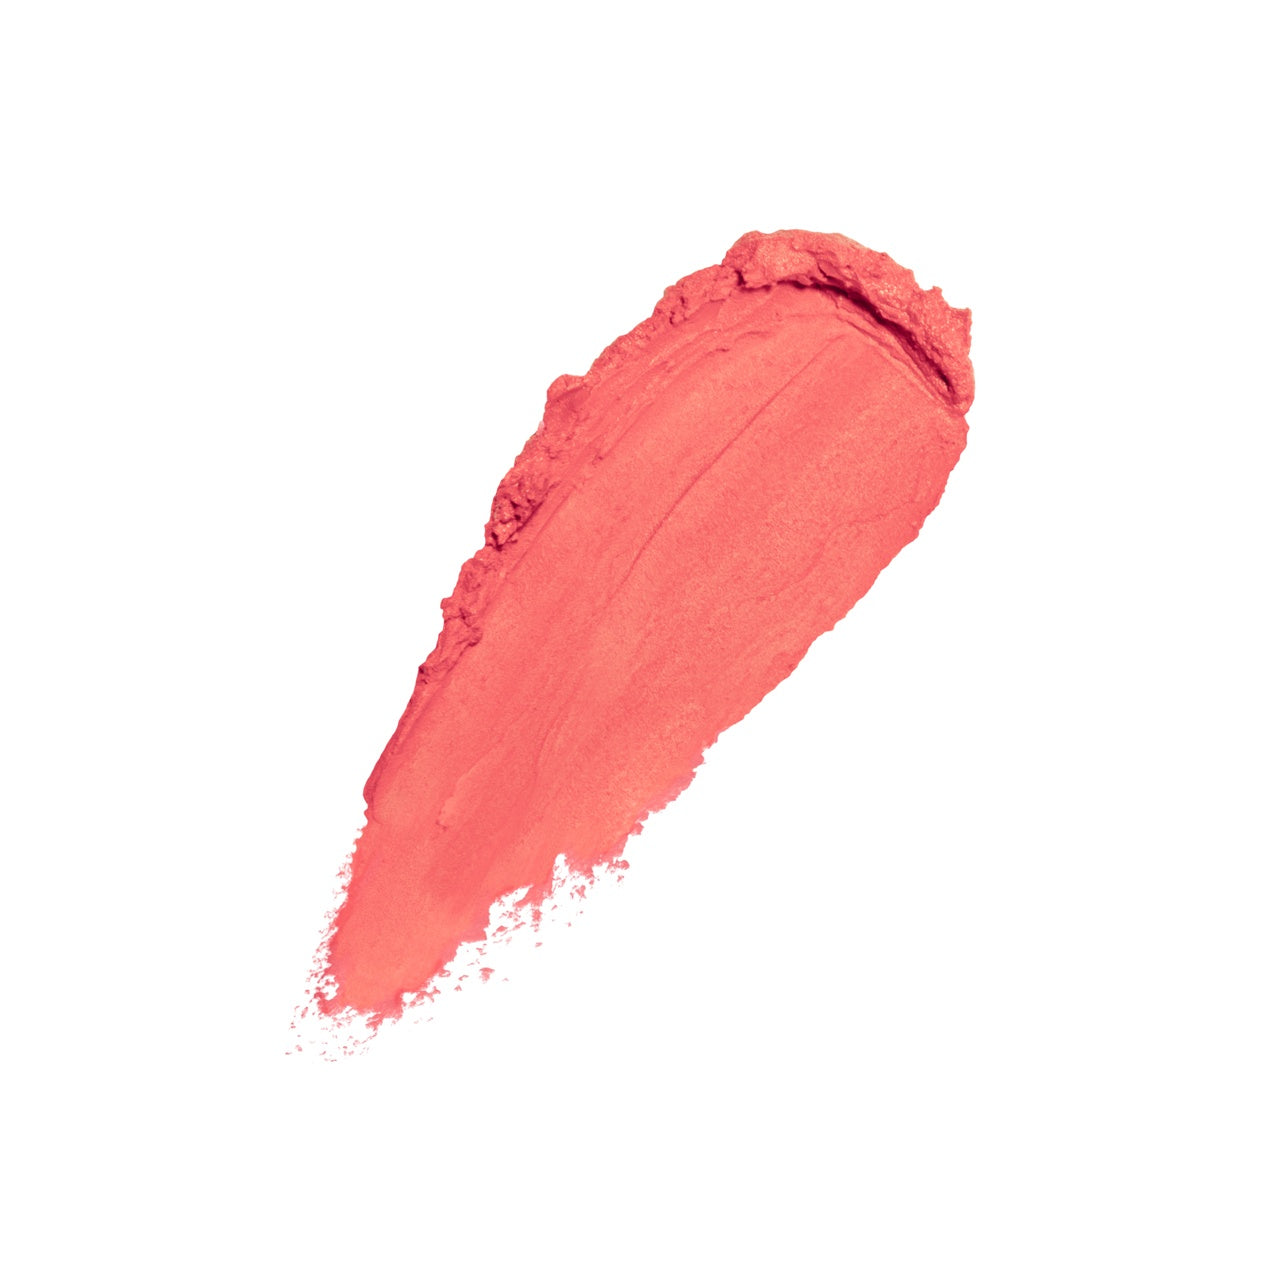 Soft Touch Lipstick variant:Punked Up Peach